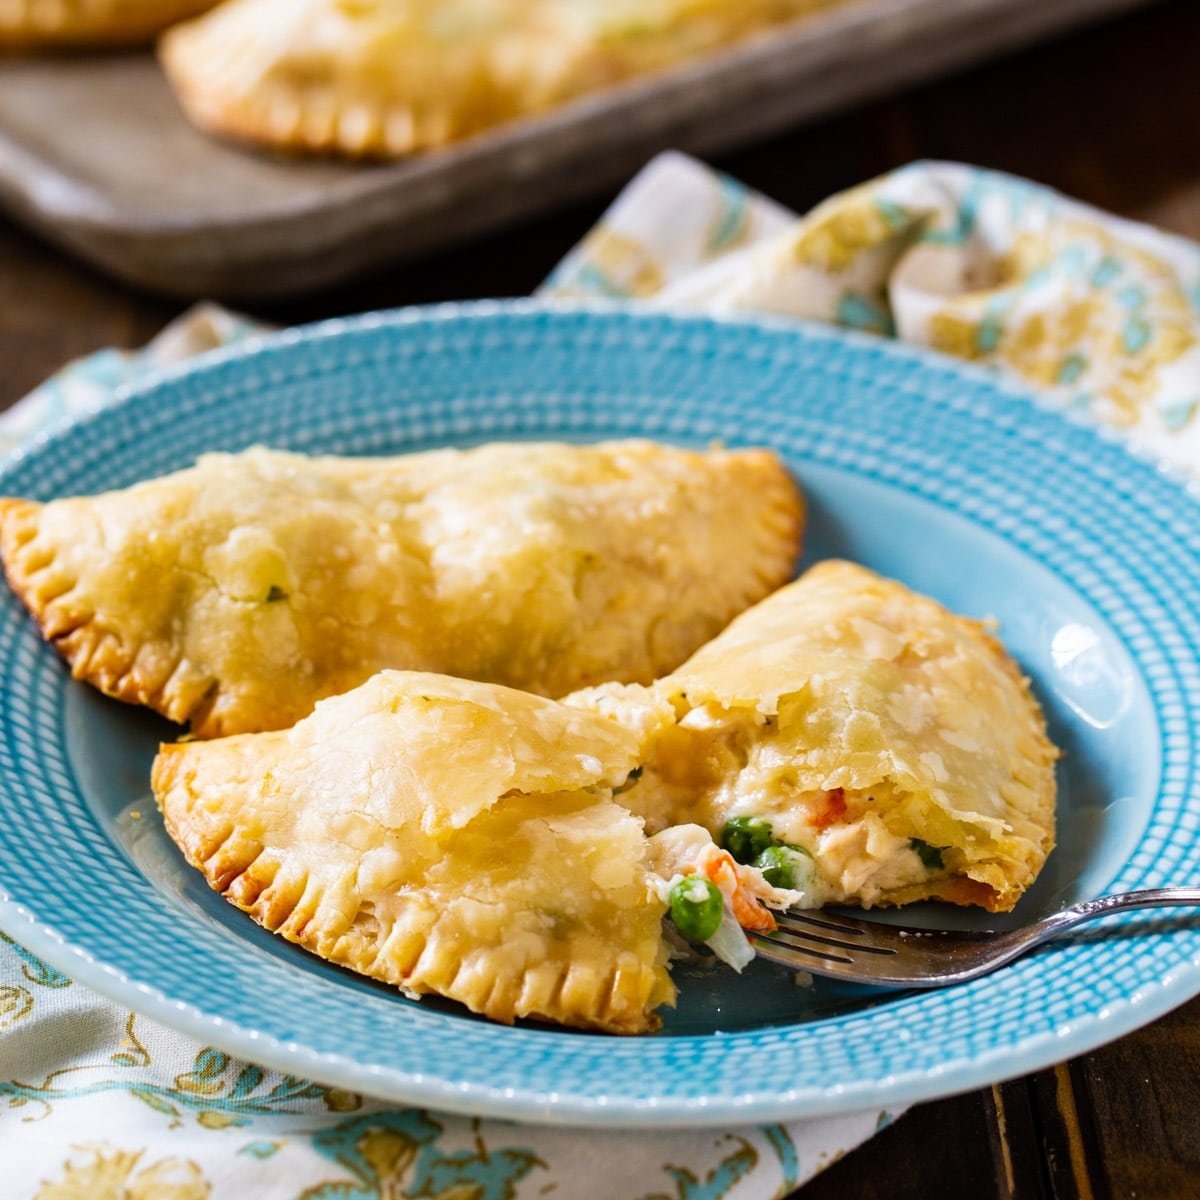 Two Chicken Pot Pie Turnovers on a plate.